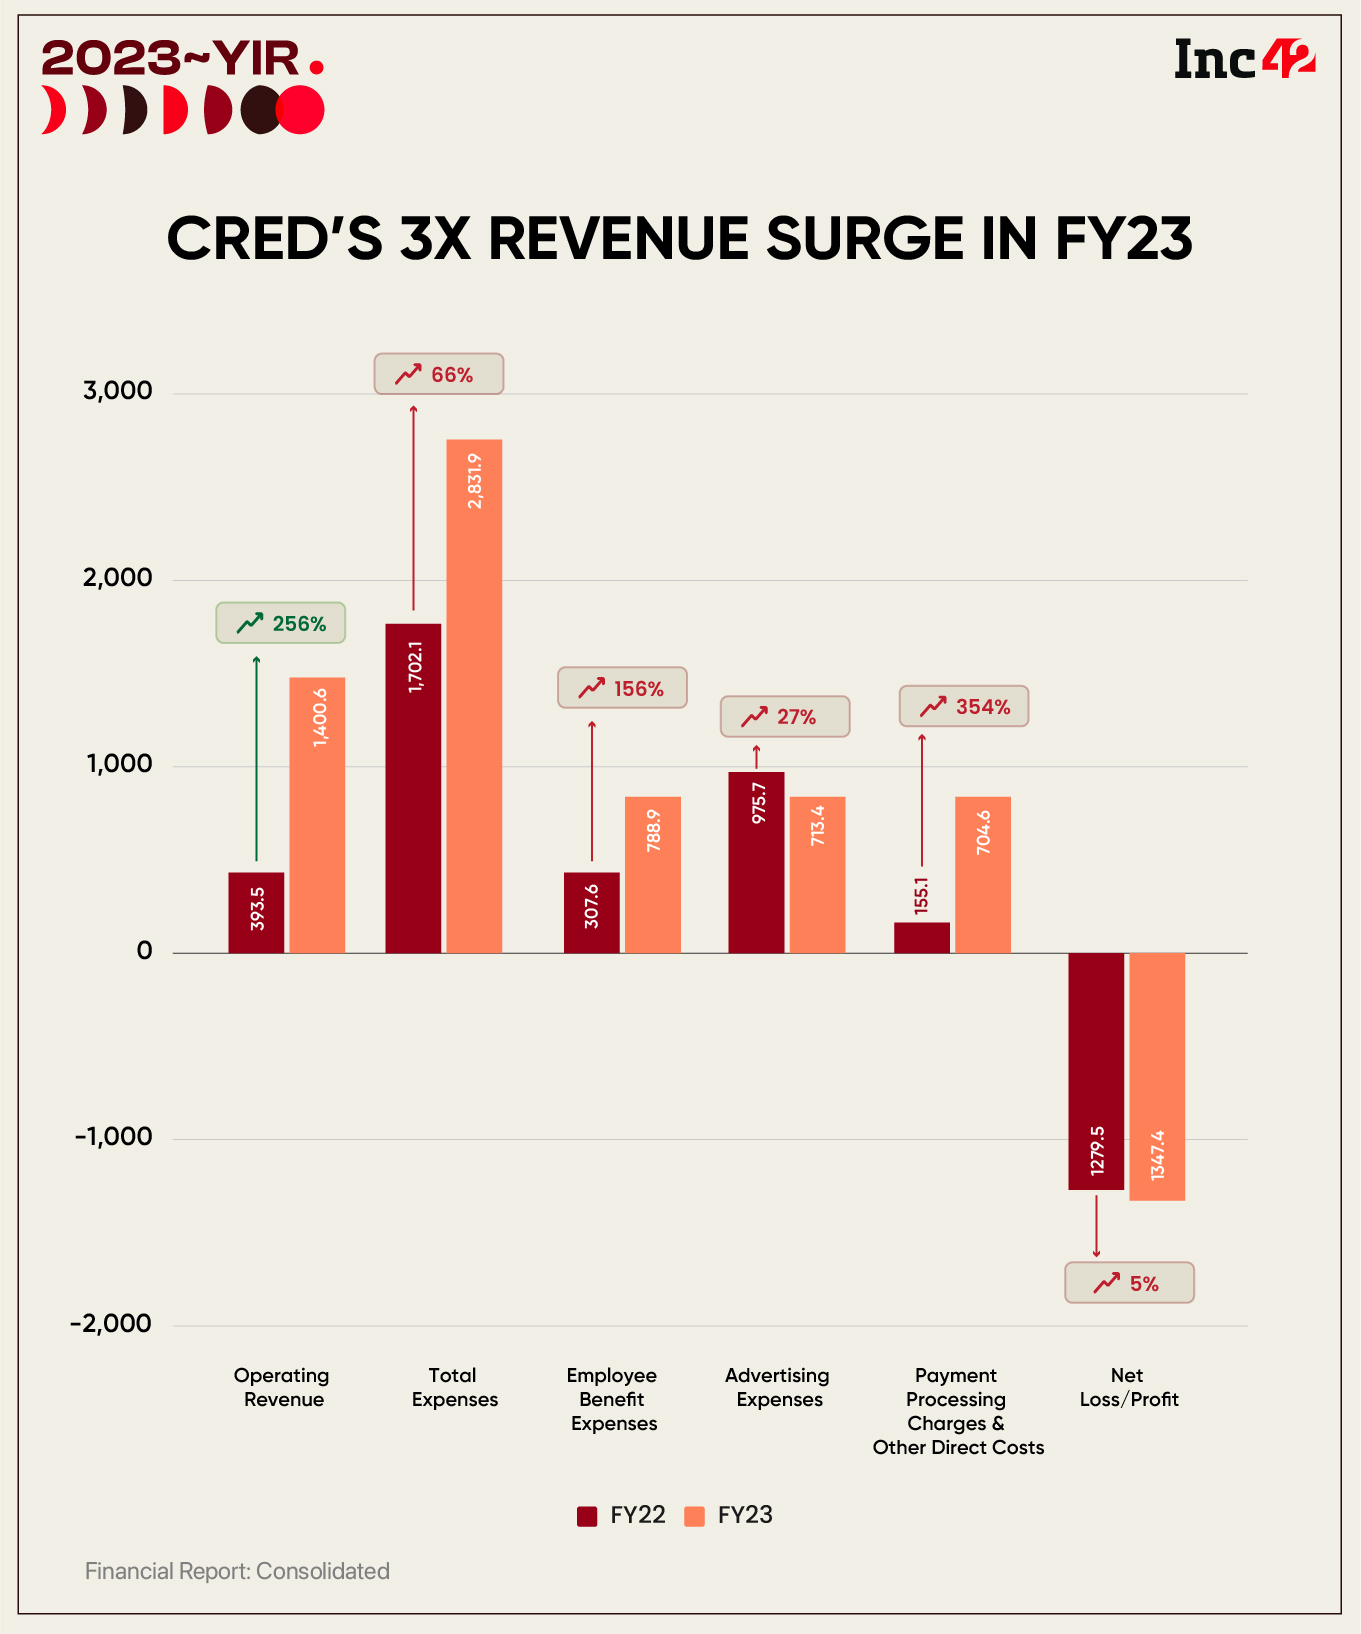 CRED’s 3X Revenue Surge In FY23